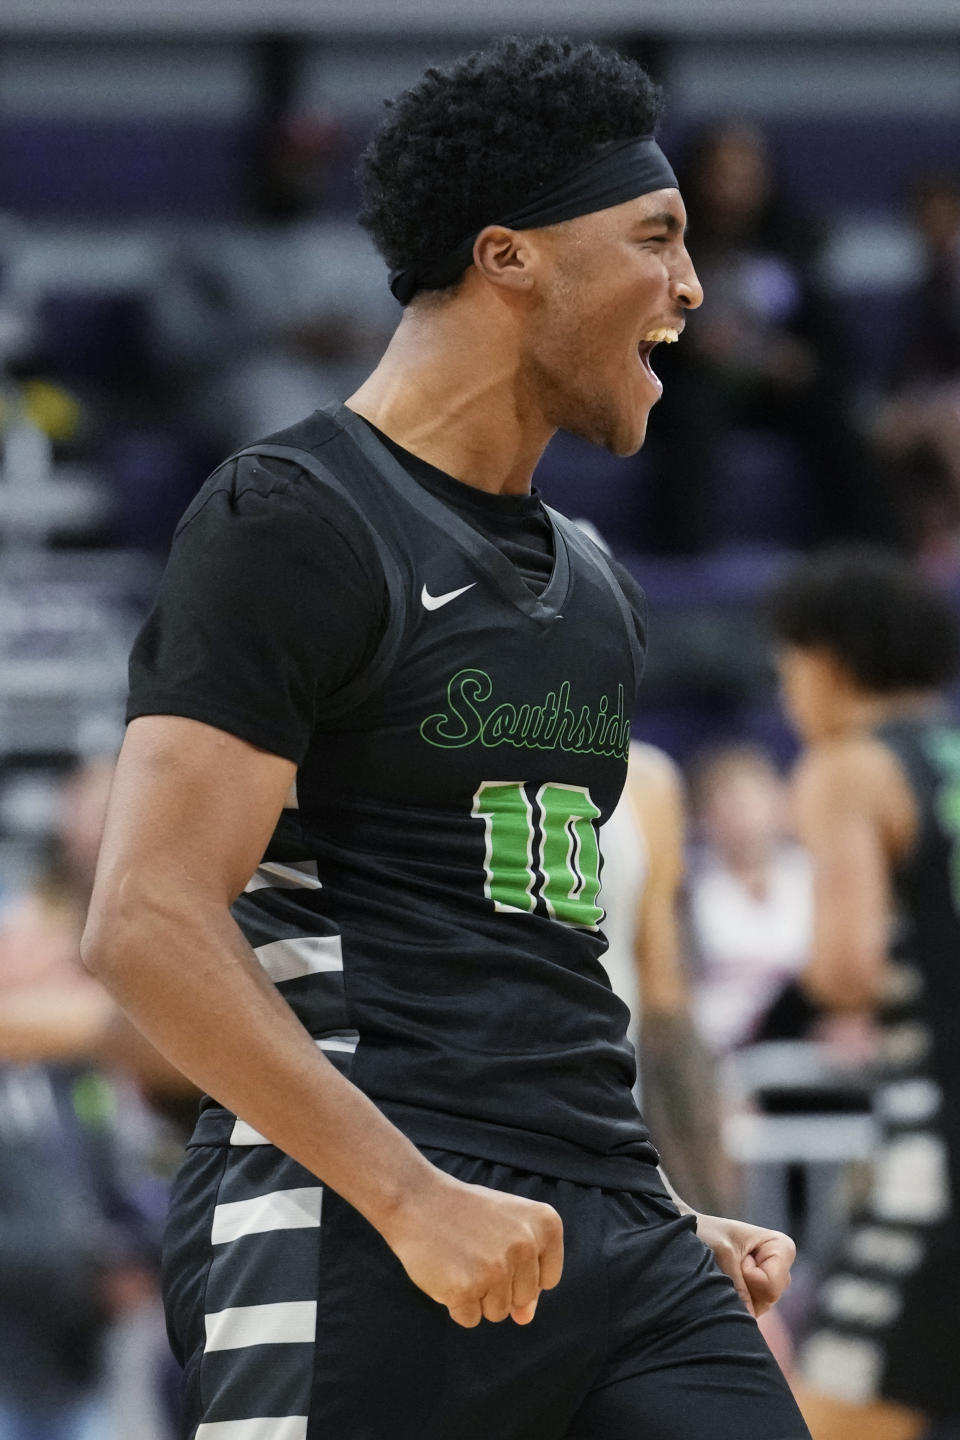 Chicago State guard A.J. Neal reacts after Northwestern guard Ty Berry missed a basket during the second half of an NCAA college basketball game in Evanston, Ill., Wednesday, Dec. 13, 2023. Chicago State won 75-73. (AP Photo/Nam Y. Huh)